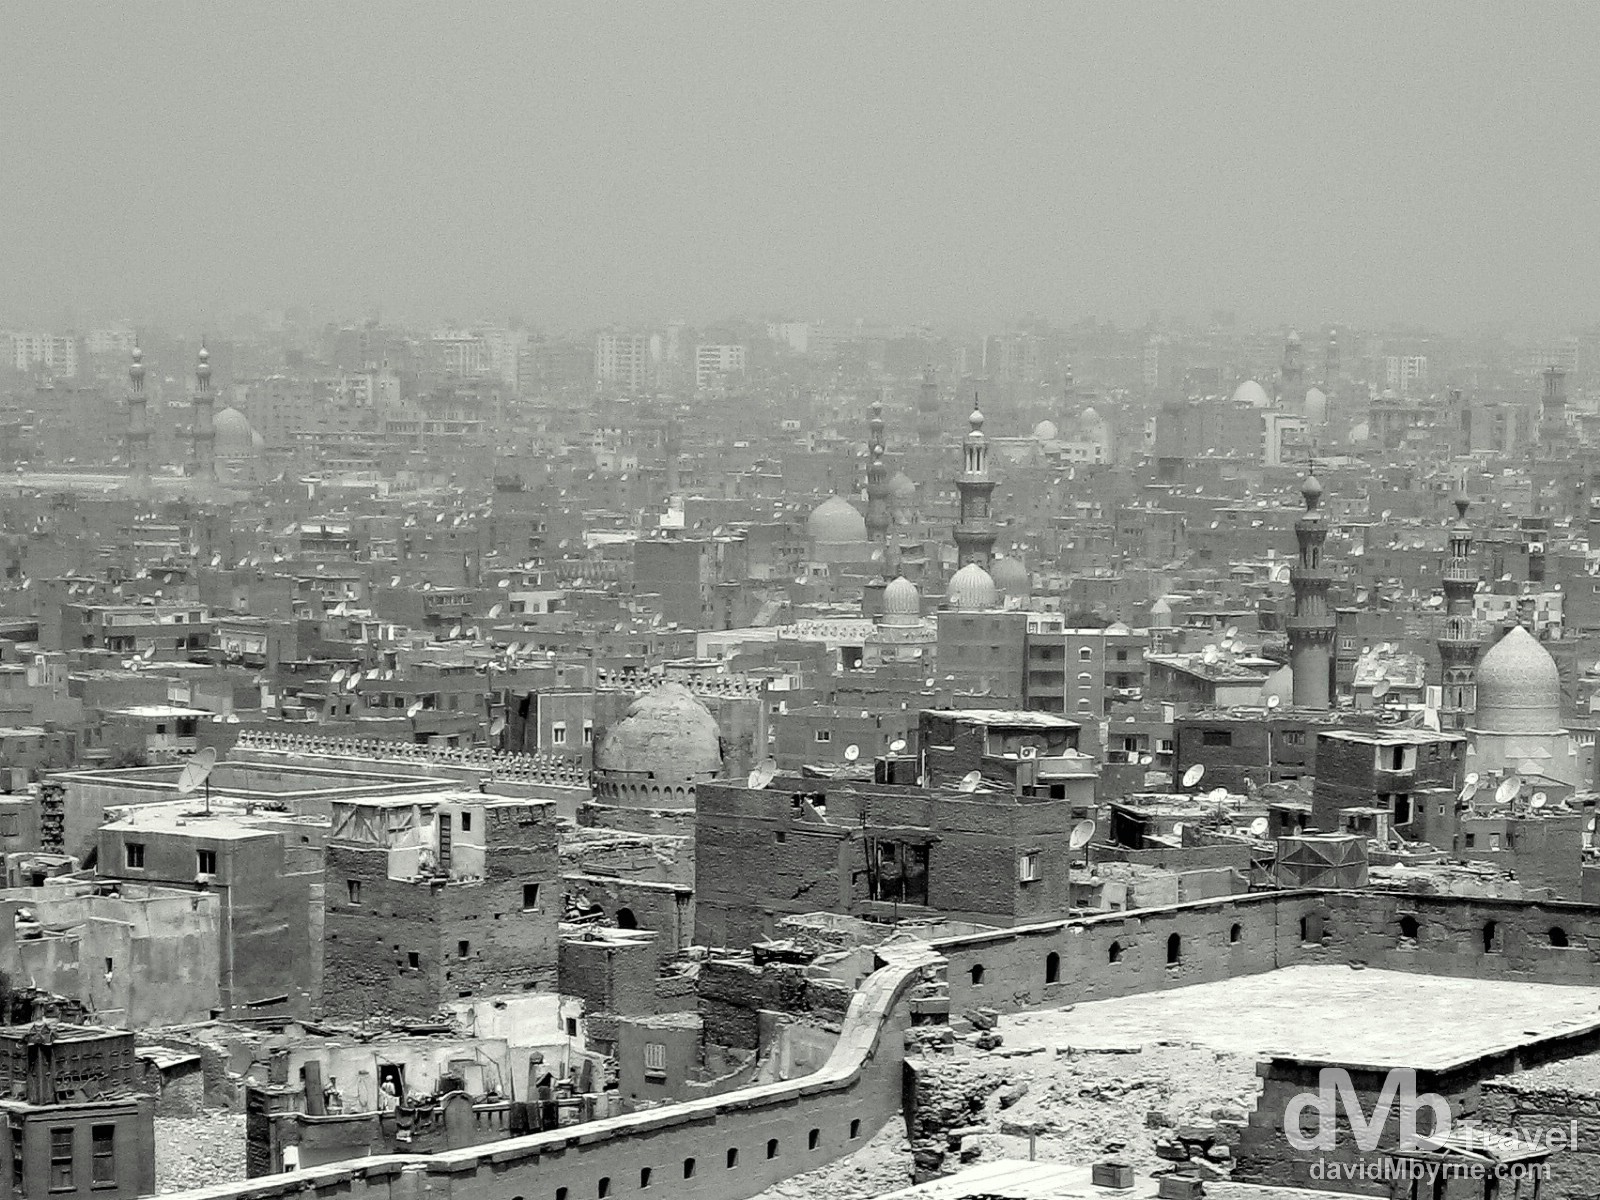 Cairo, Egypt, as seen from the Saladin Citadel. April 14, 2008.